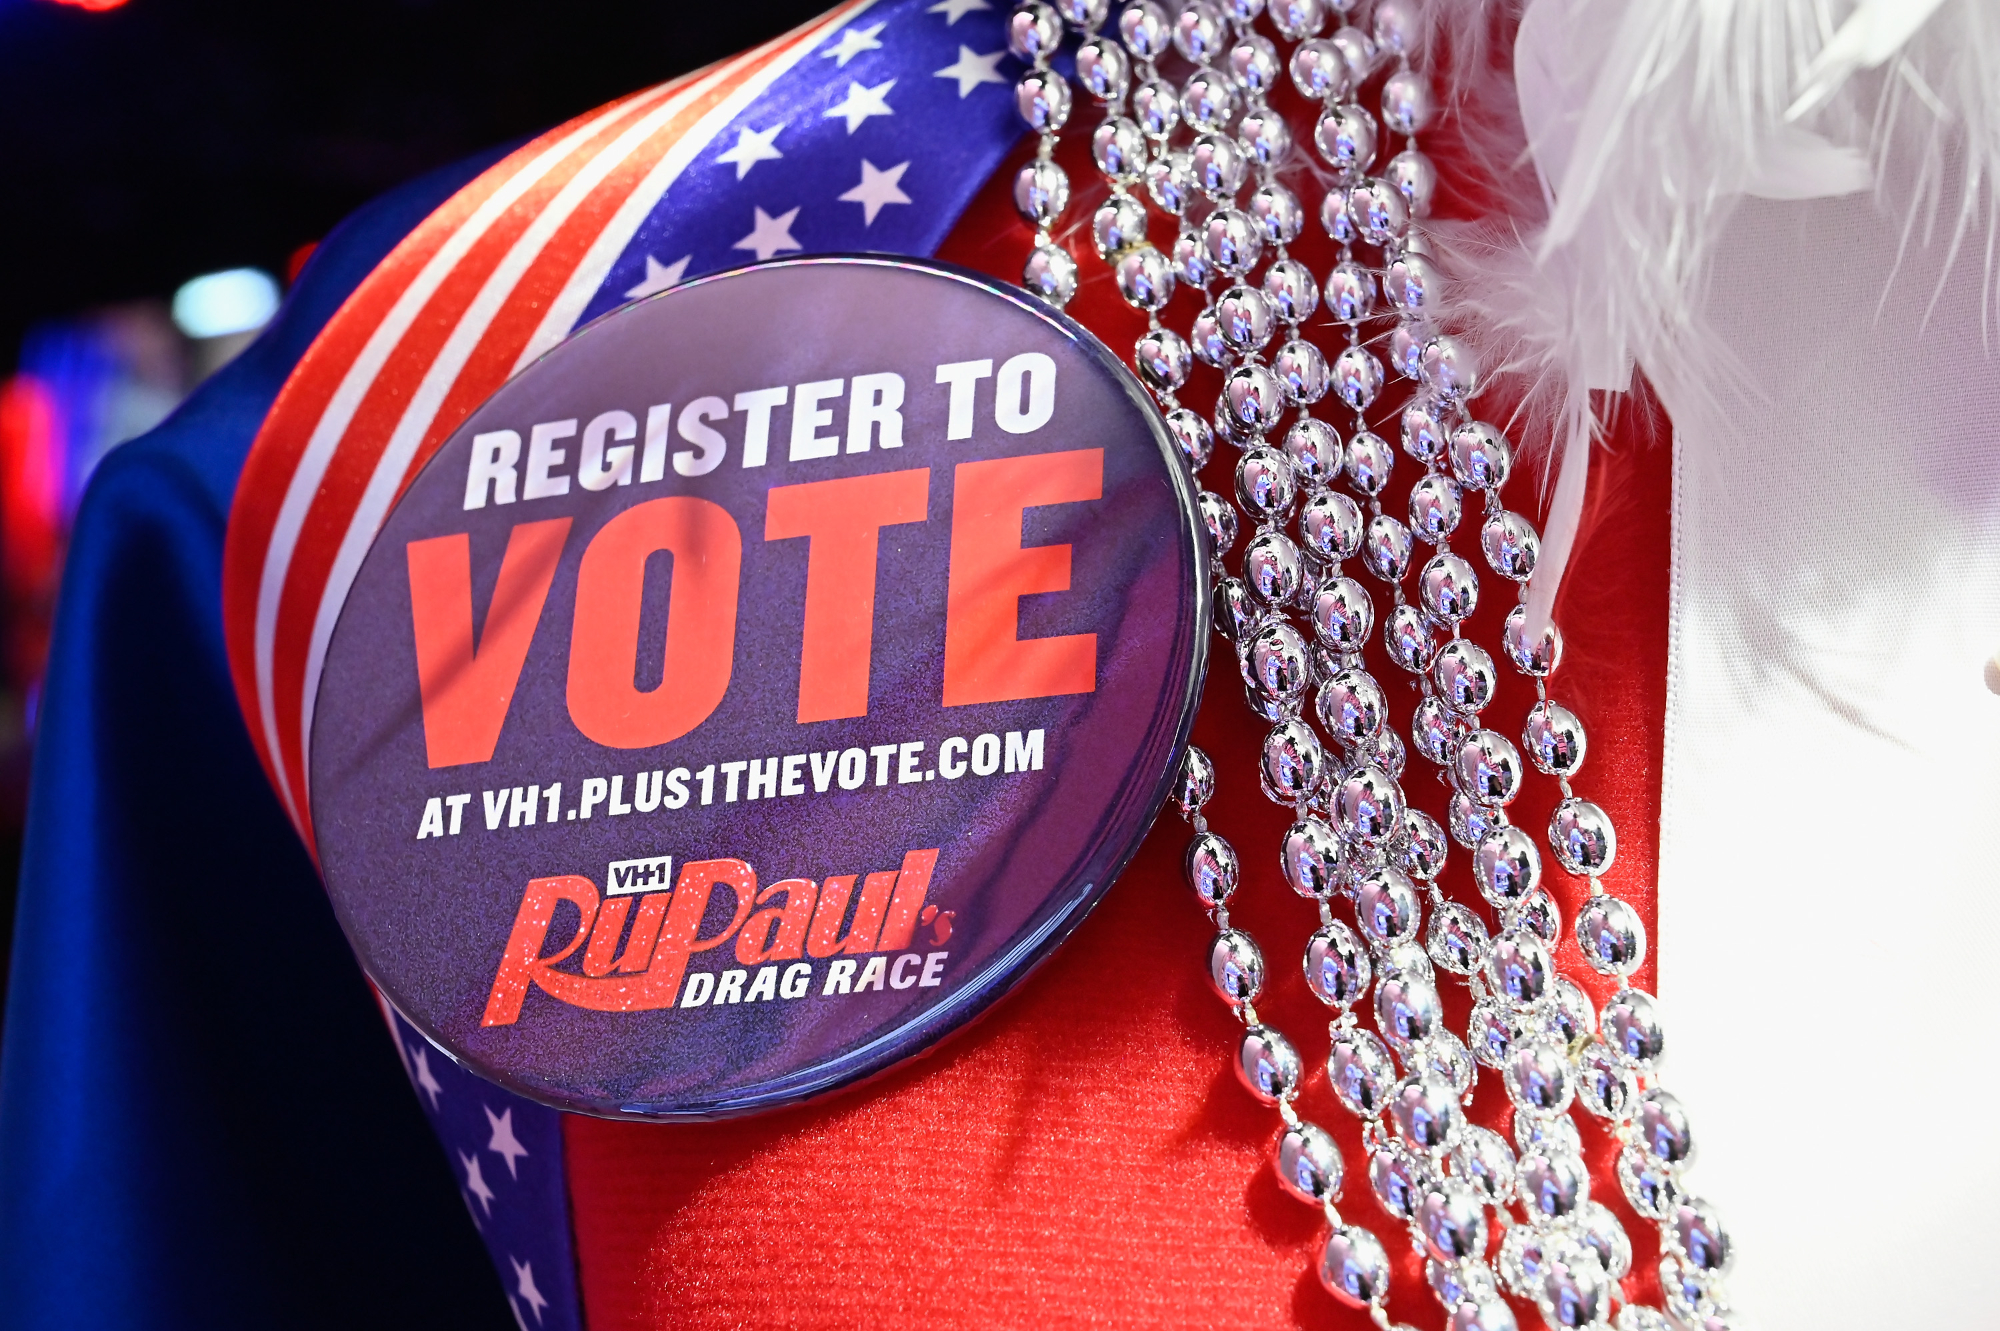 'RuPaul's Drag Race' register to vote pin, whose cast is speaking up about Roe v. Wade. Next to the pin is a beaded necklace.